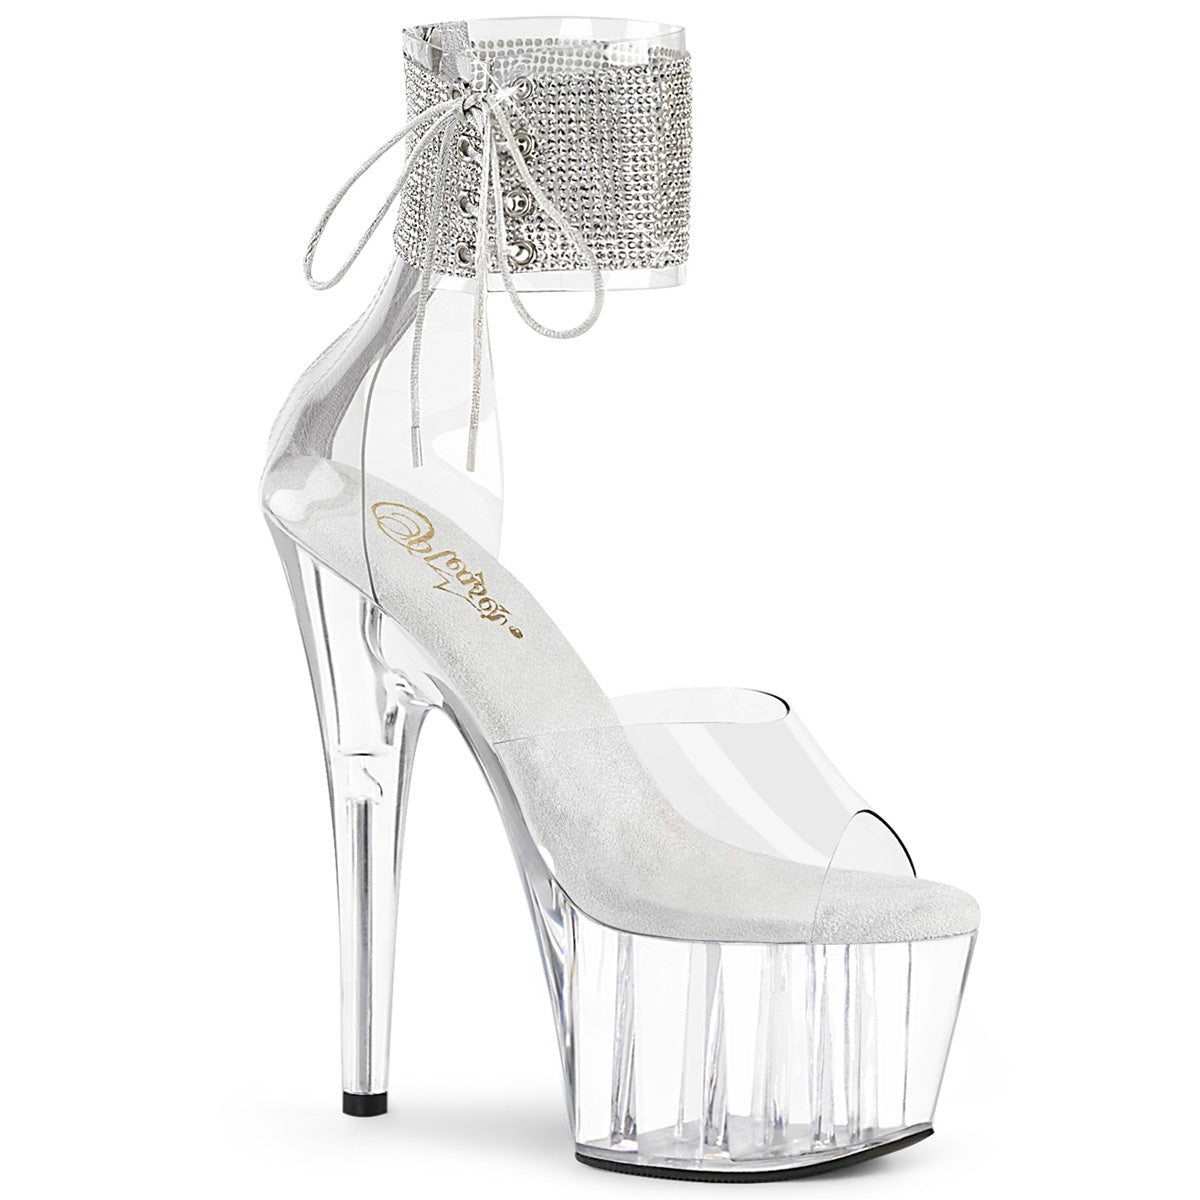 ADORE-724RS Ankle Sandal High Heel